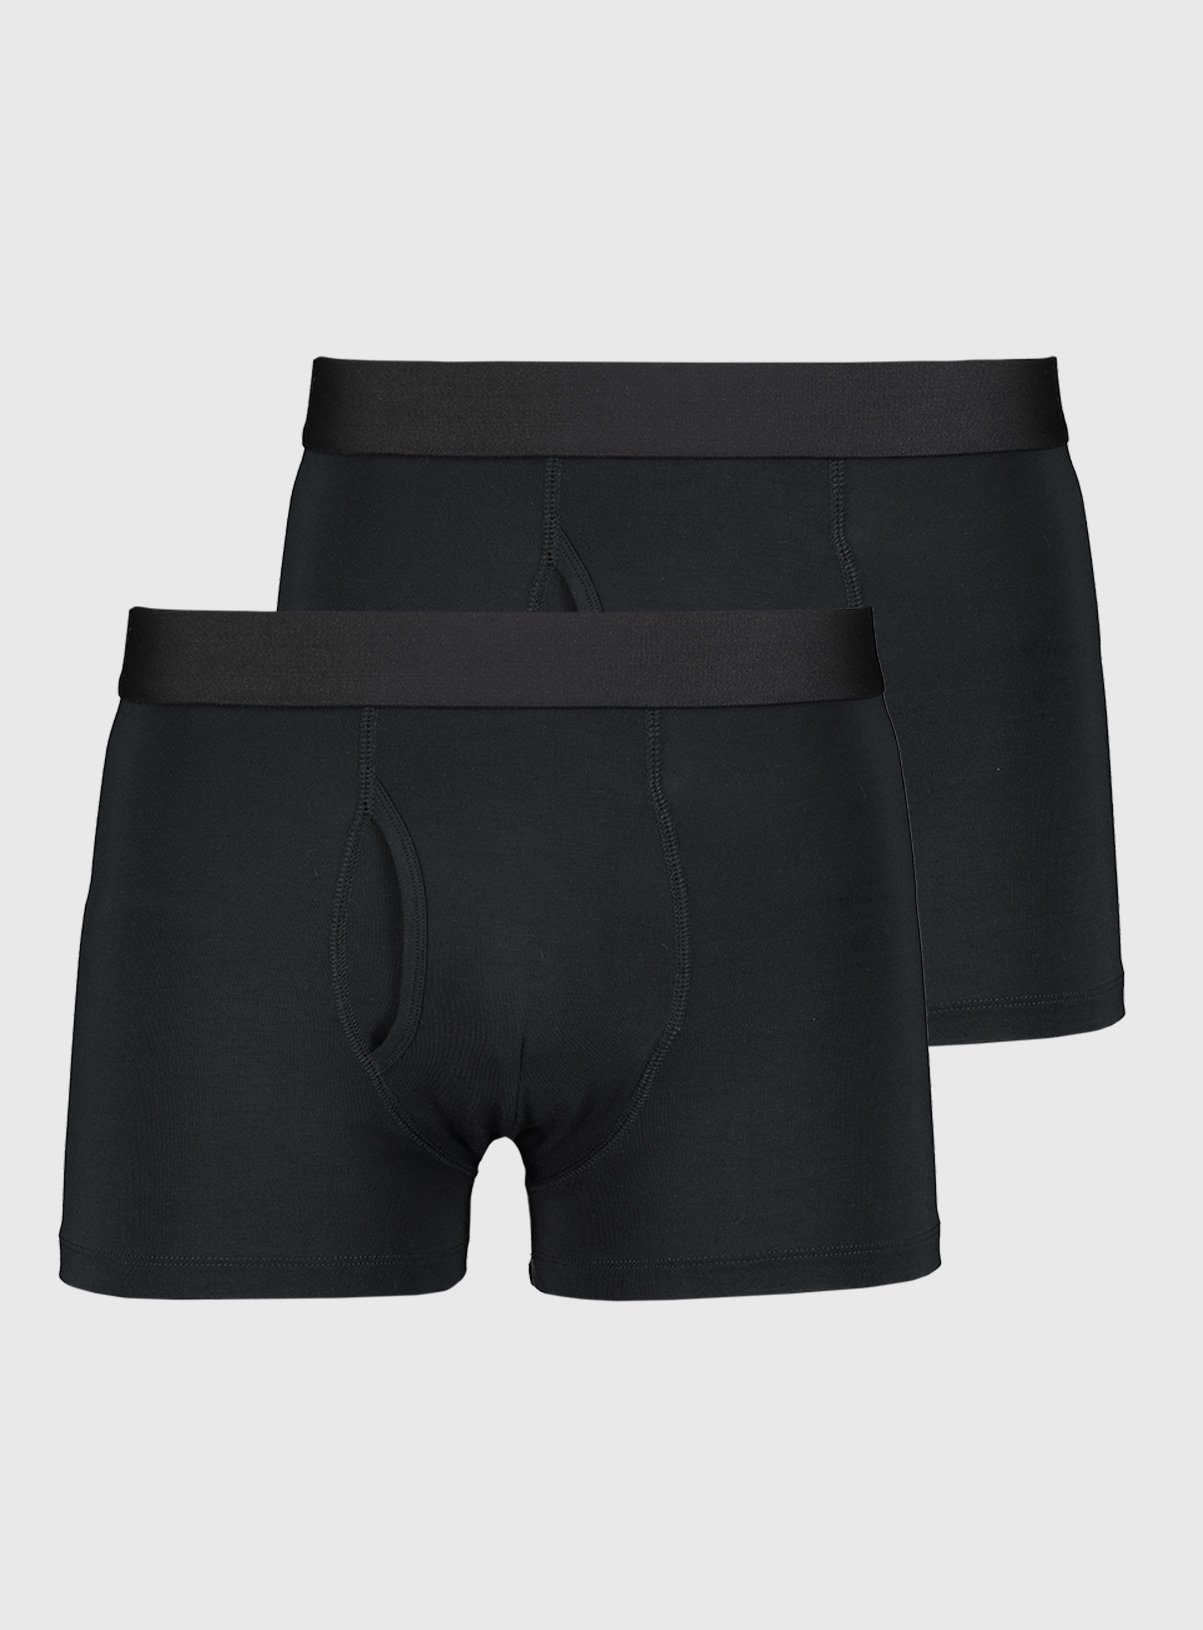 Black Tencel Trunks 2 Pack Reviews - Updated May 2023